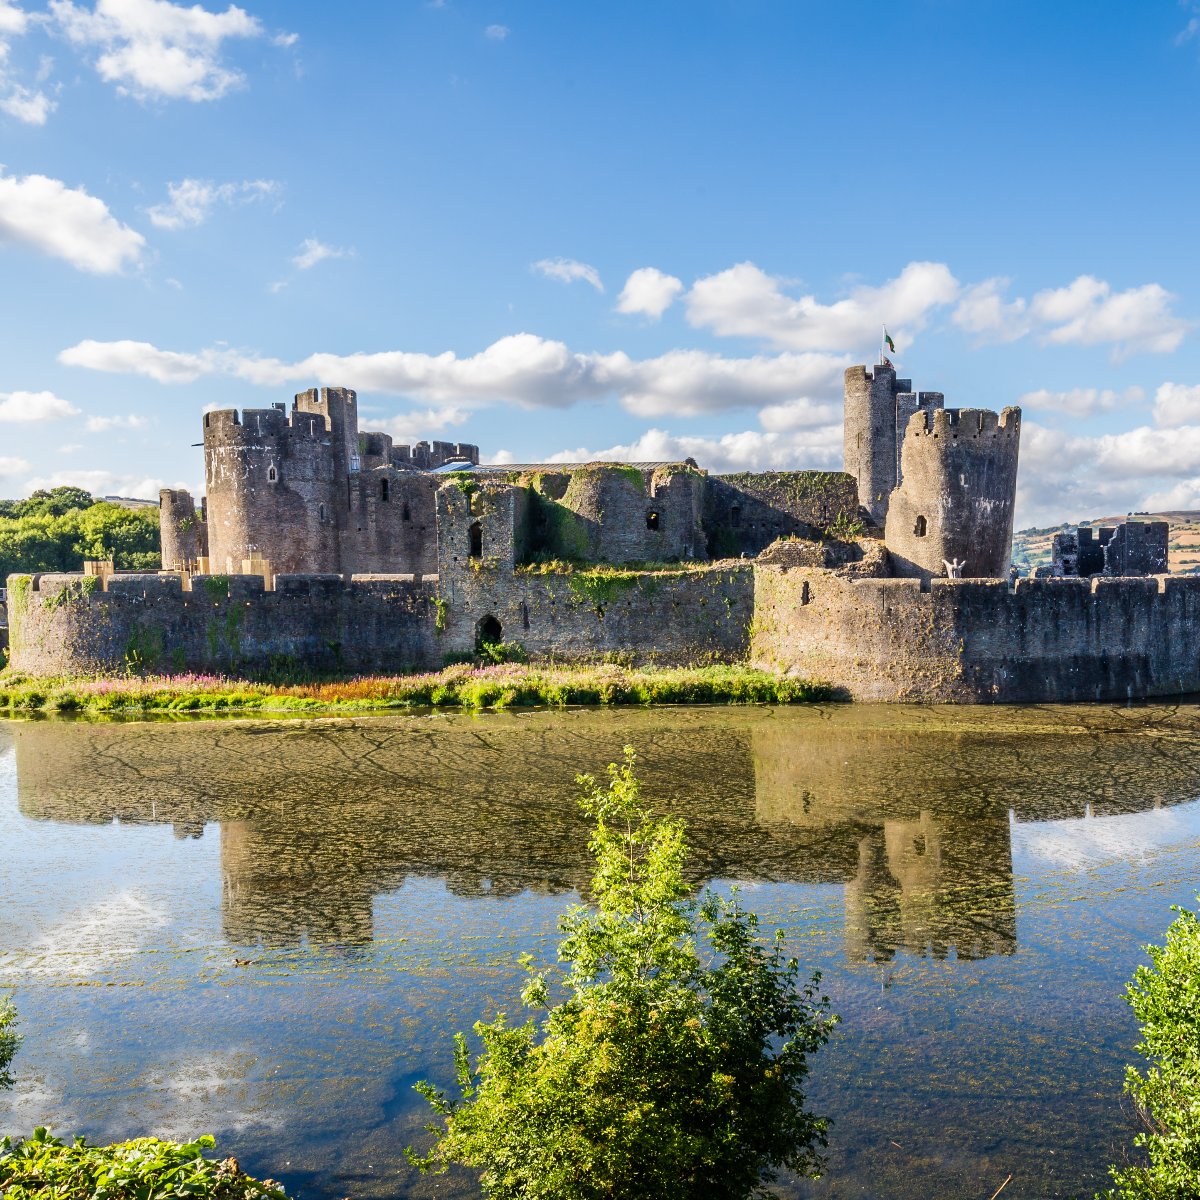 Caerphilly Castle and moat